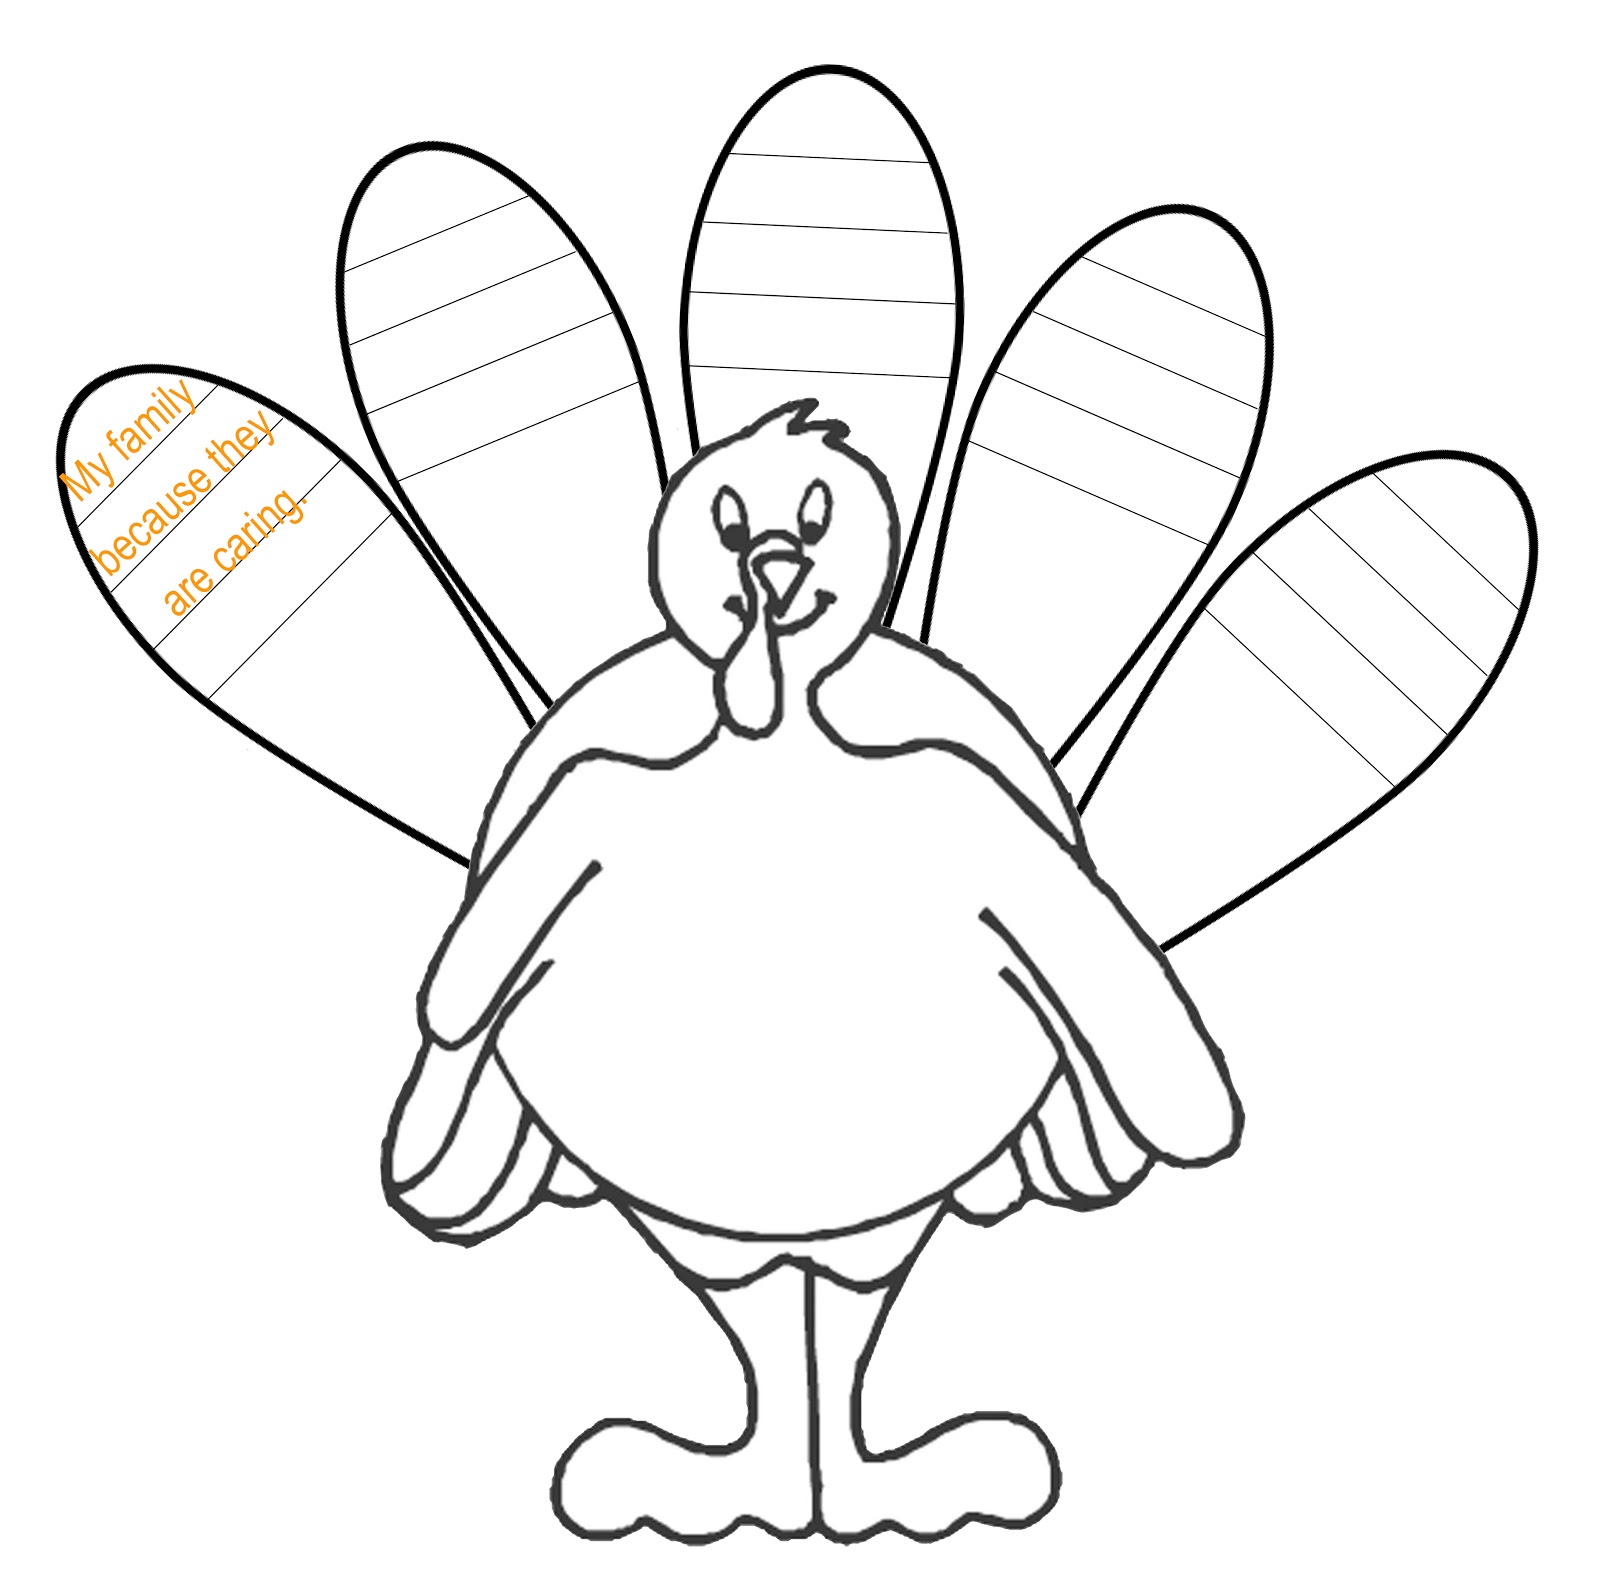 blank-turkey-template-10-templates-example-templates-example